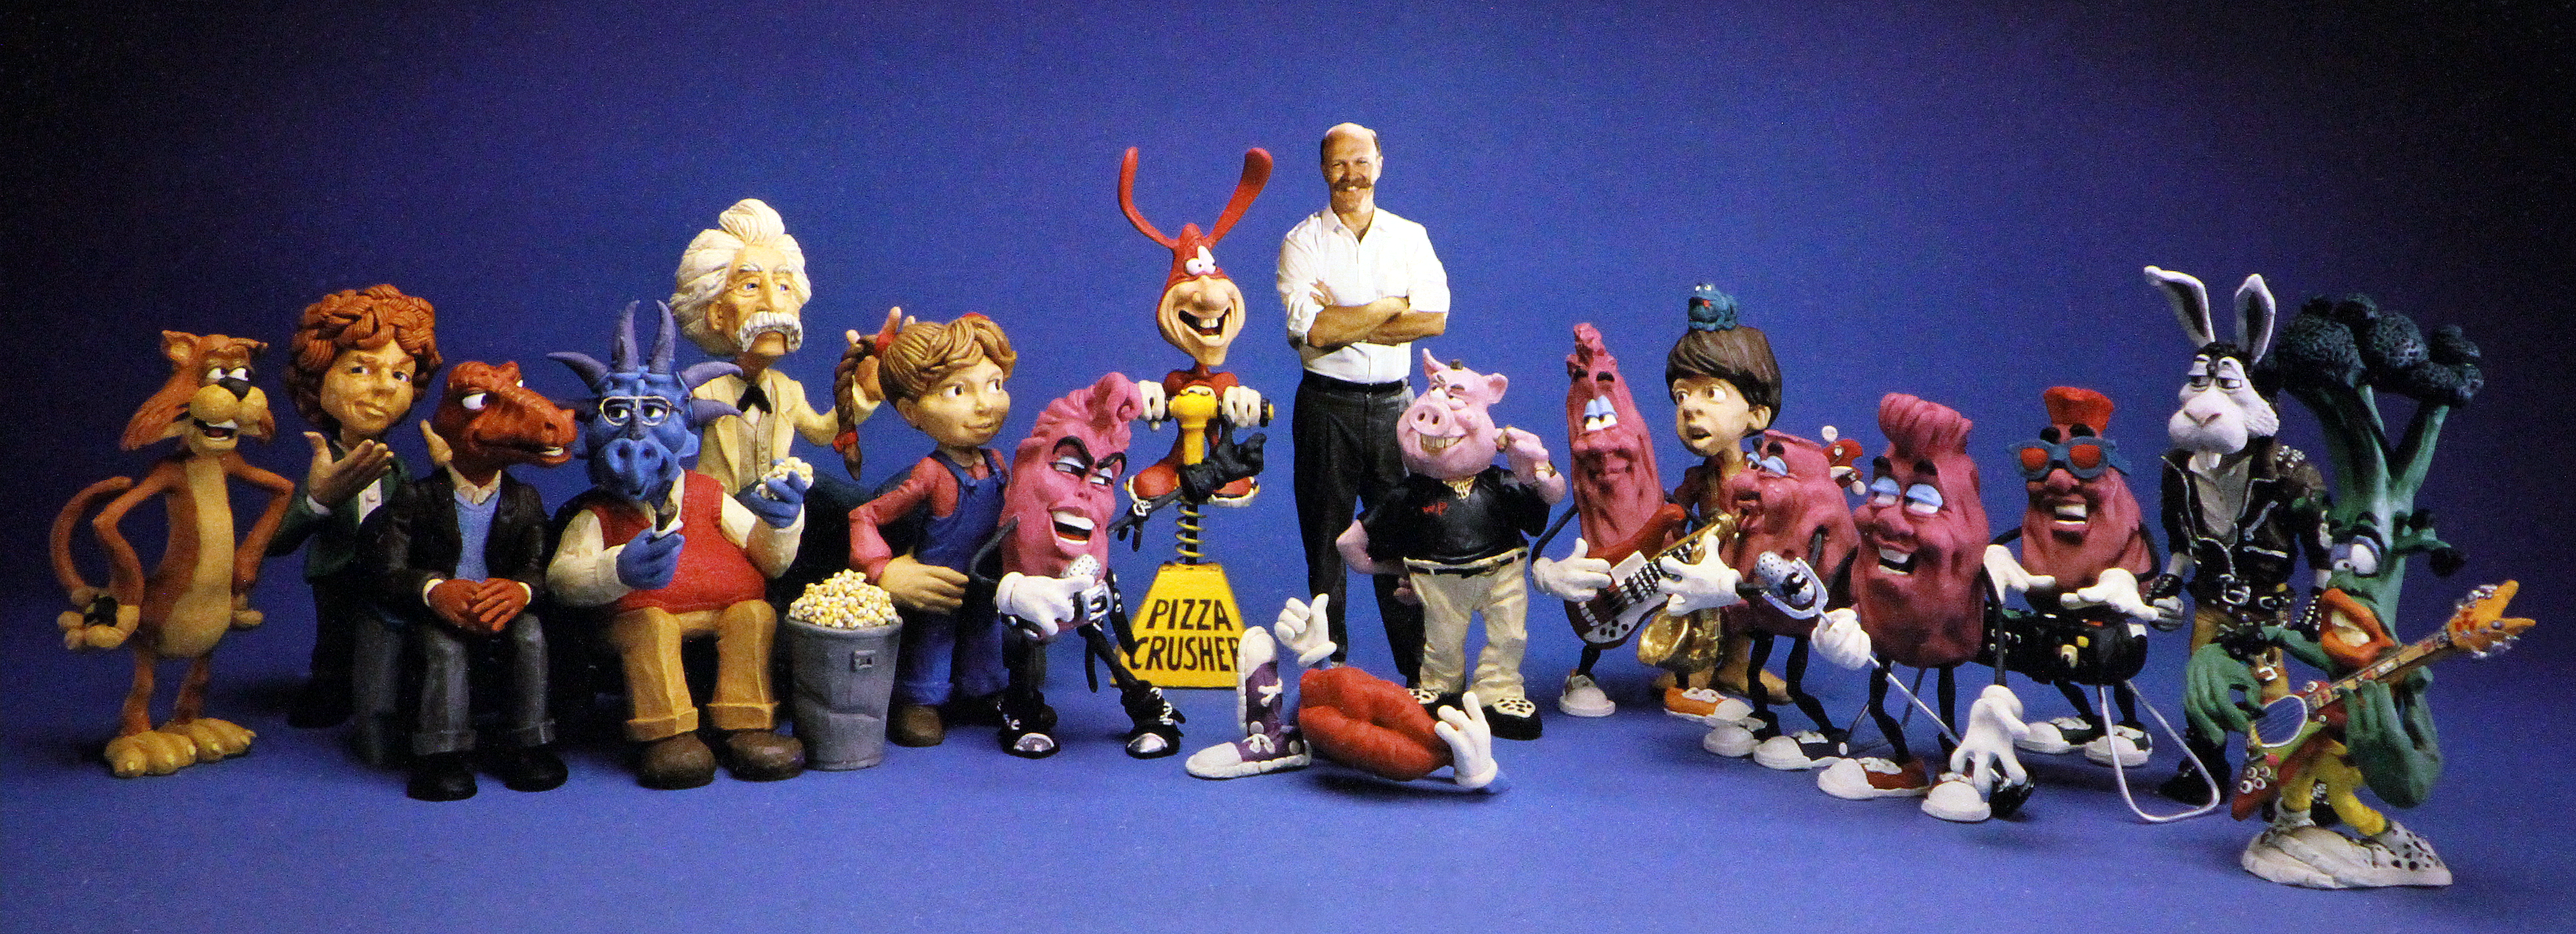 Will Vinton posing with his created characters.